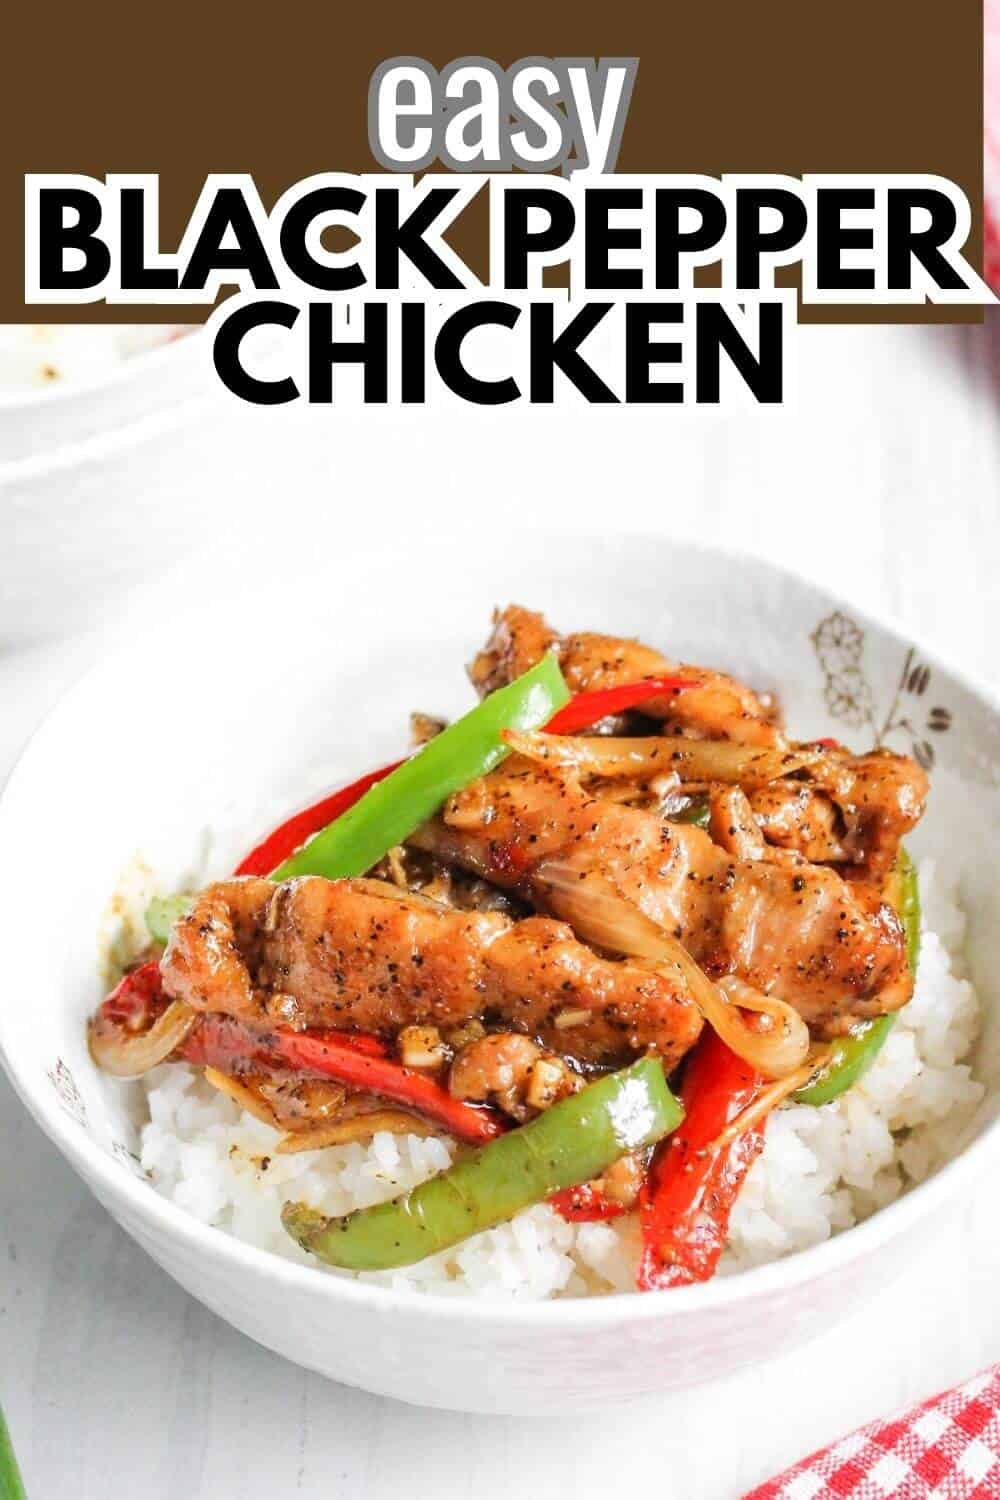 Bowl of black pepper chicken on rice with text.